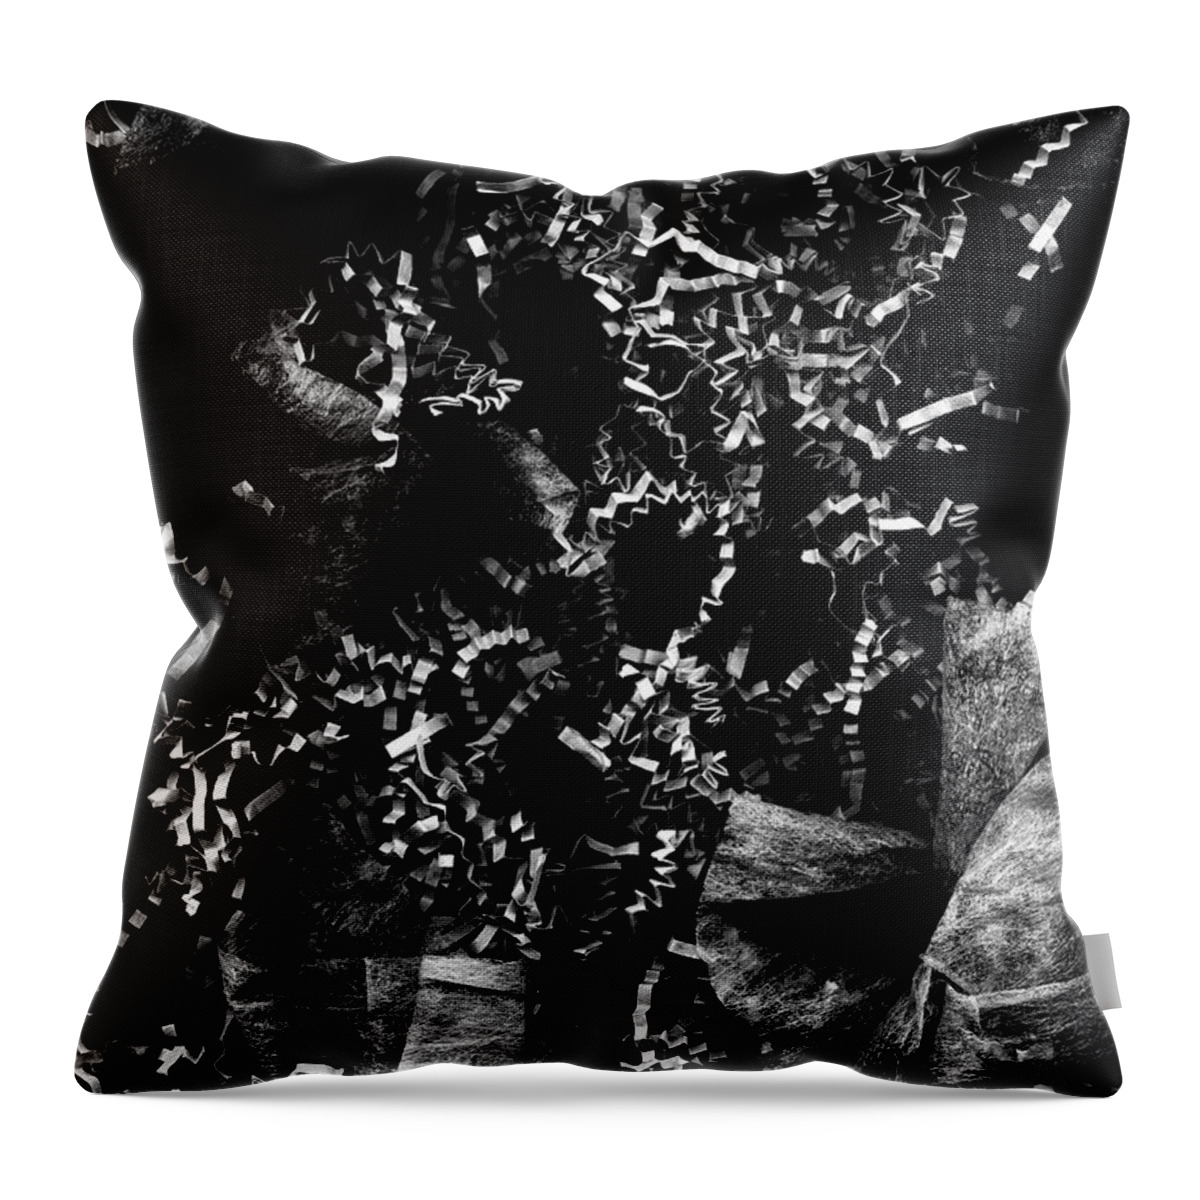 Abstract Photograph Throw Pillow featuring the digital art Untitled 11 by Doug Duffey